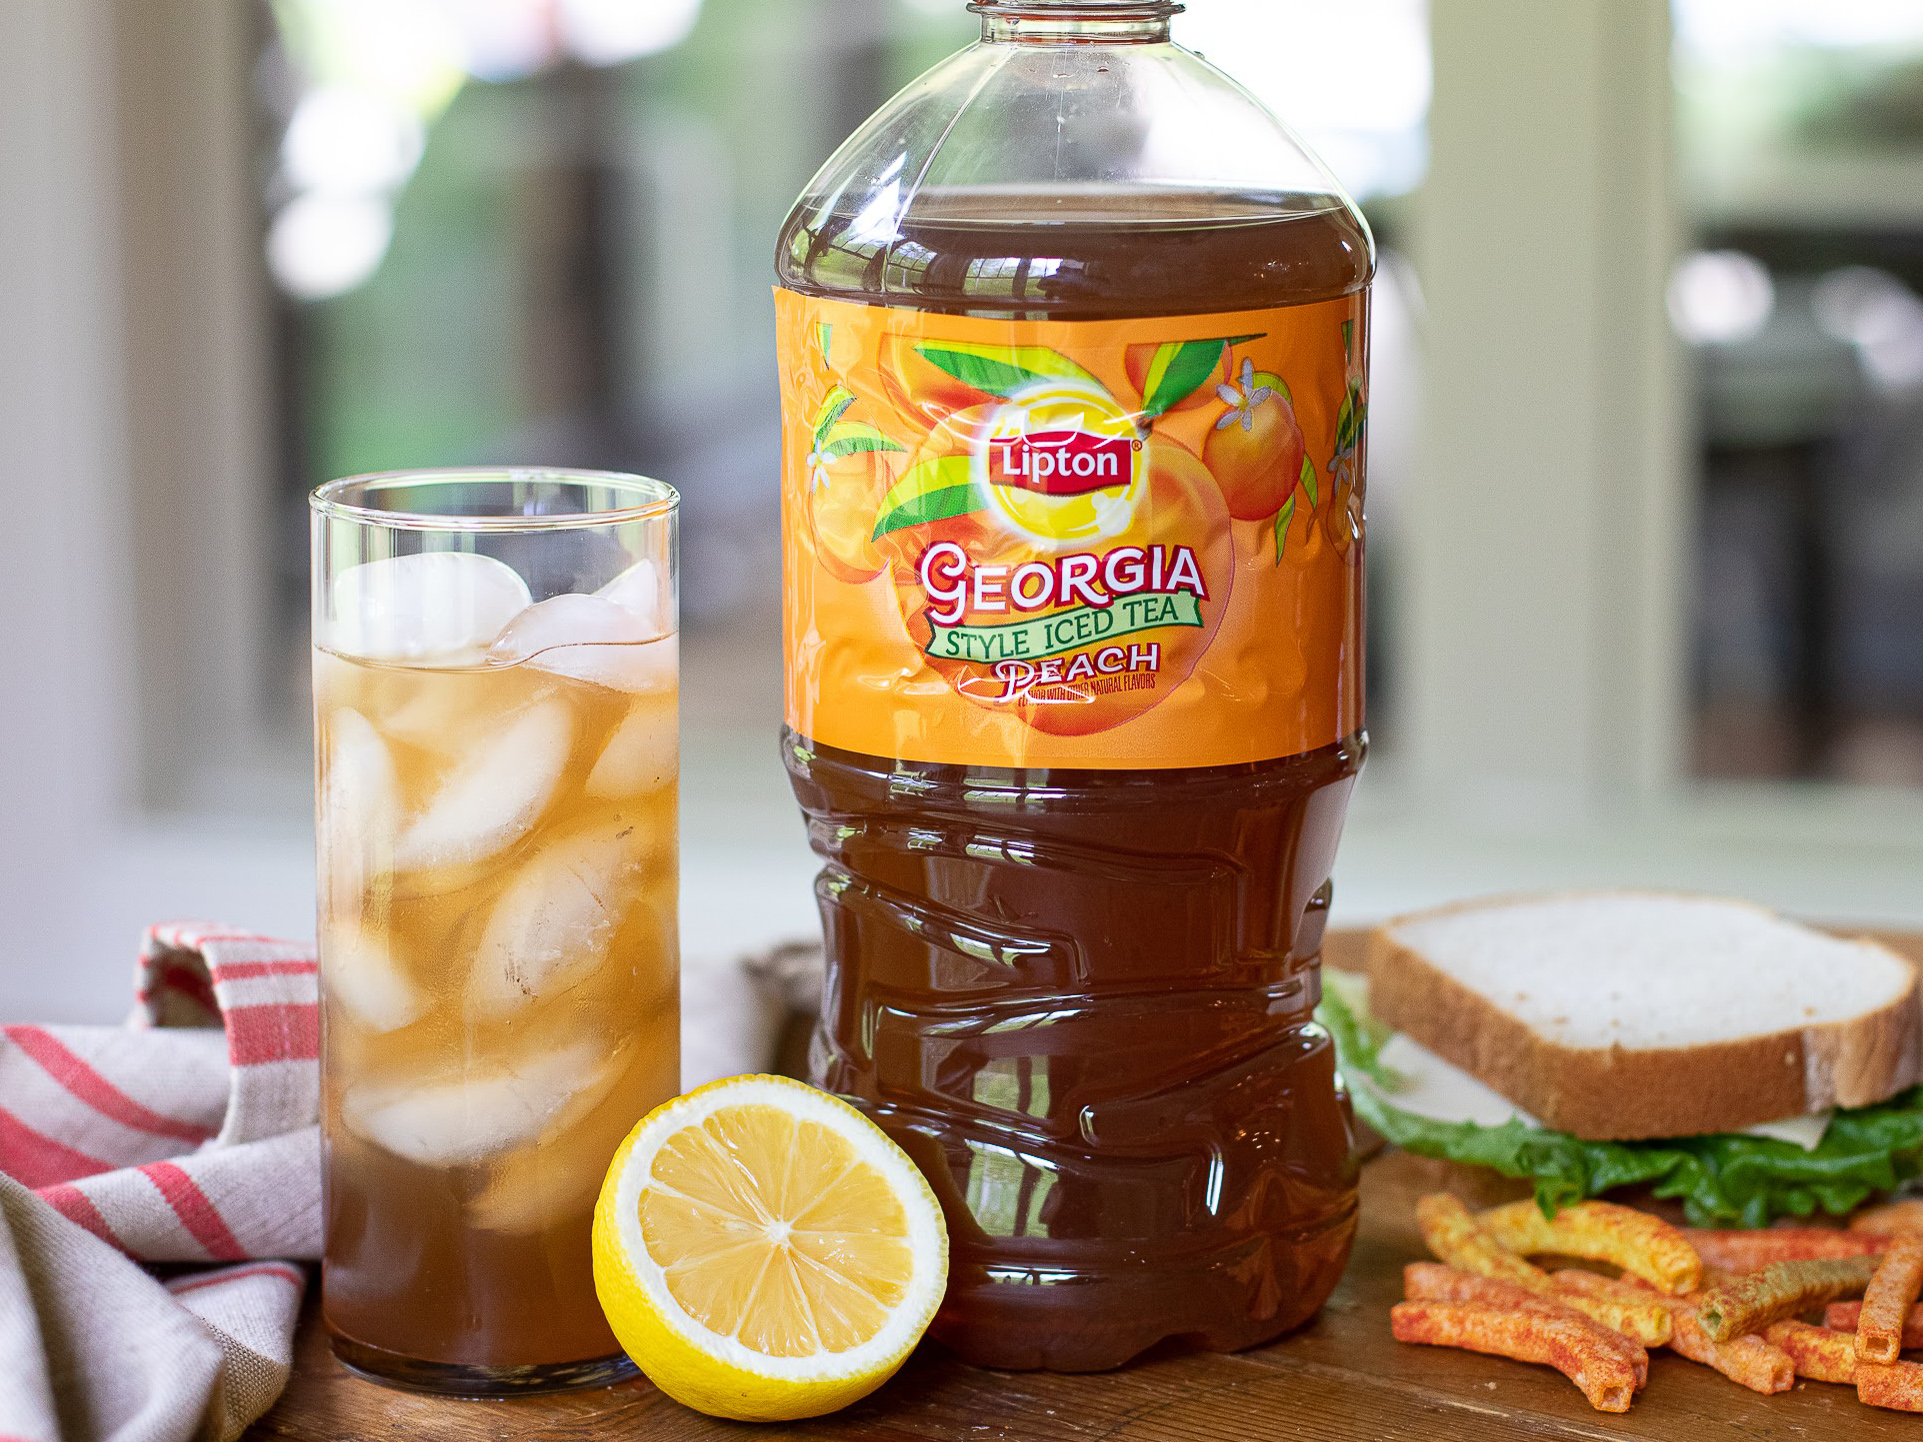 Get Lipton Ready To Drink Tea As Low As FREE At Publix